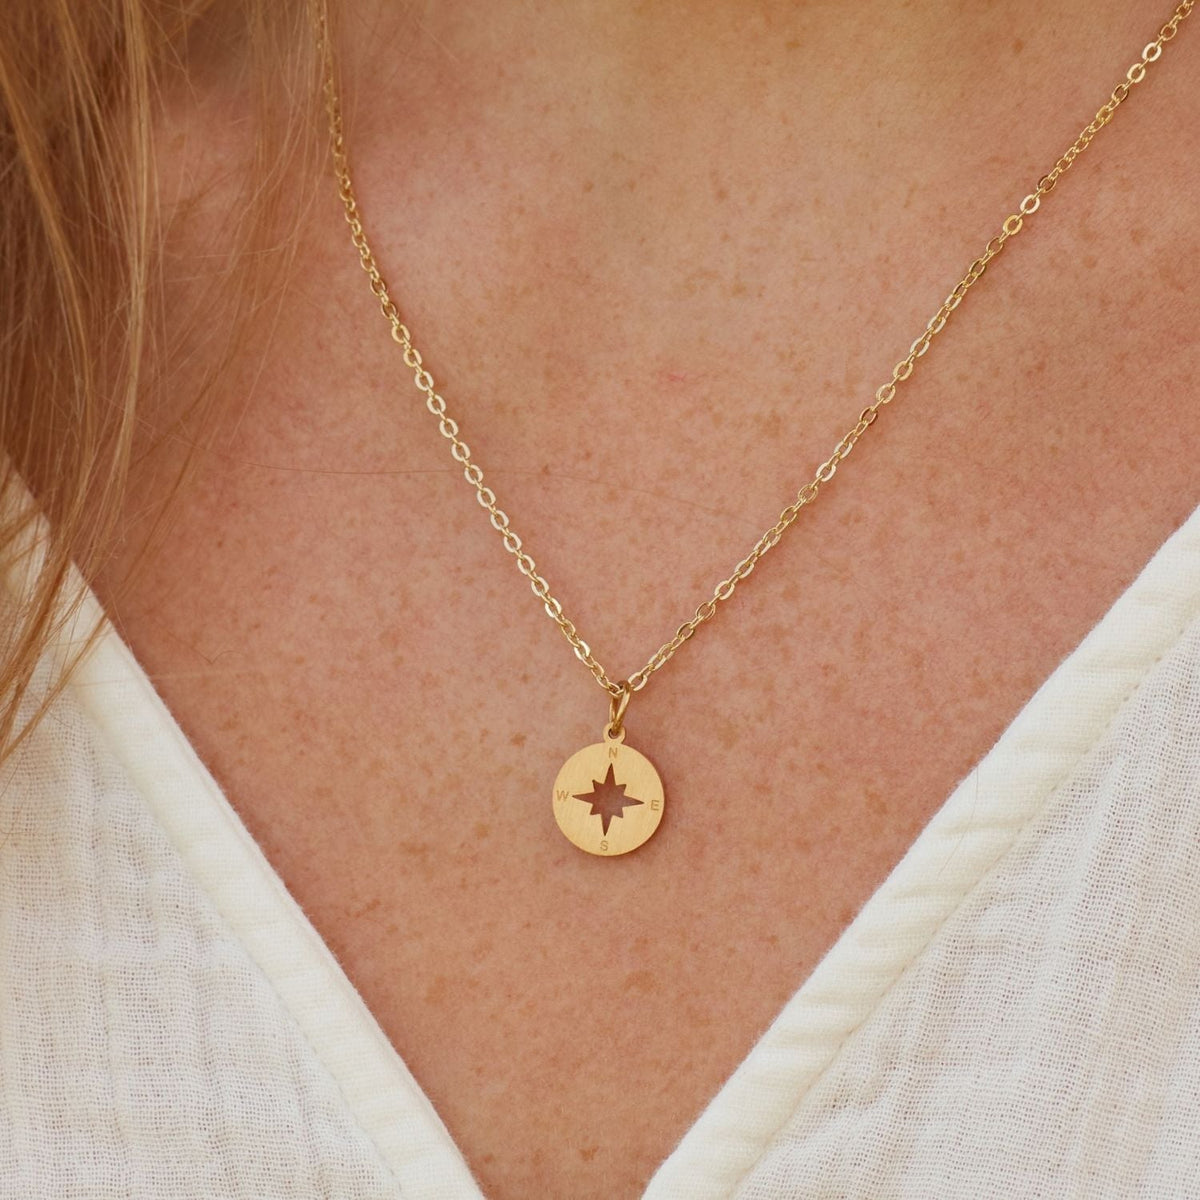 To My Best Friend | Chosen Family | Compass Necklace